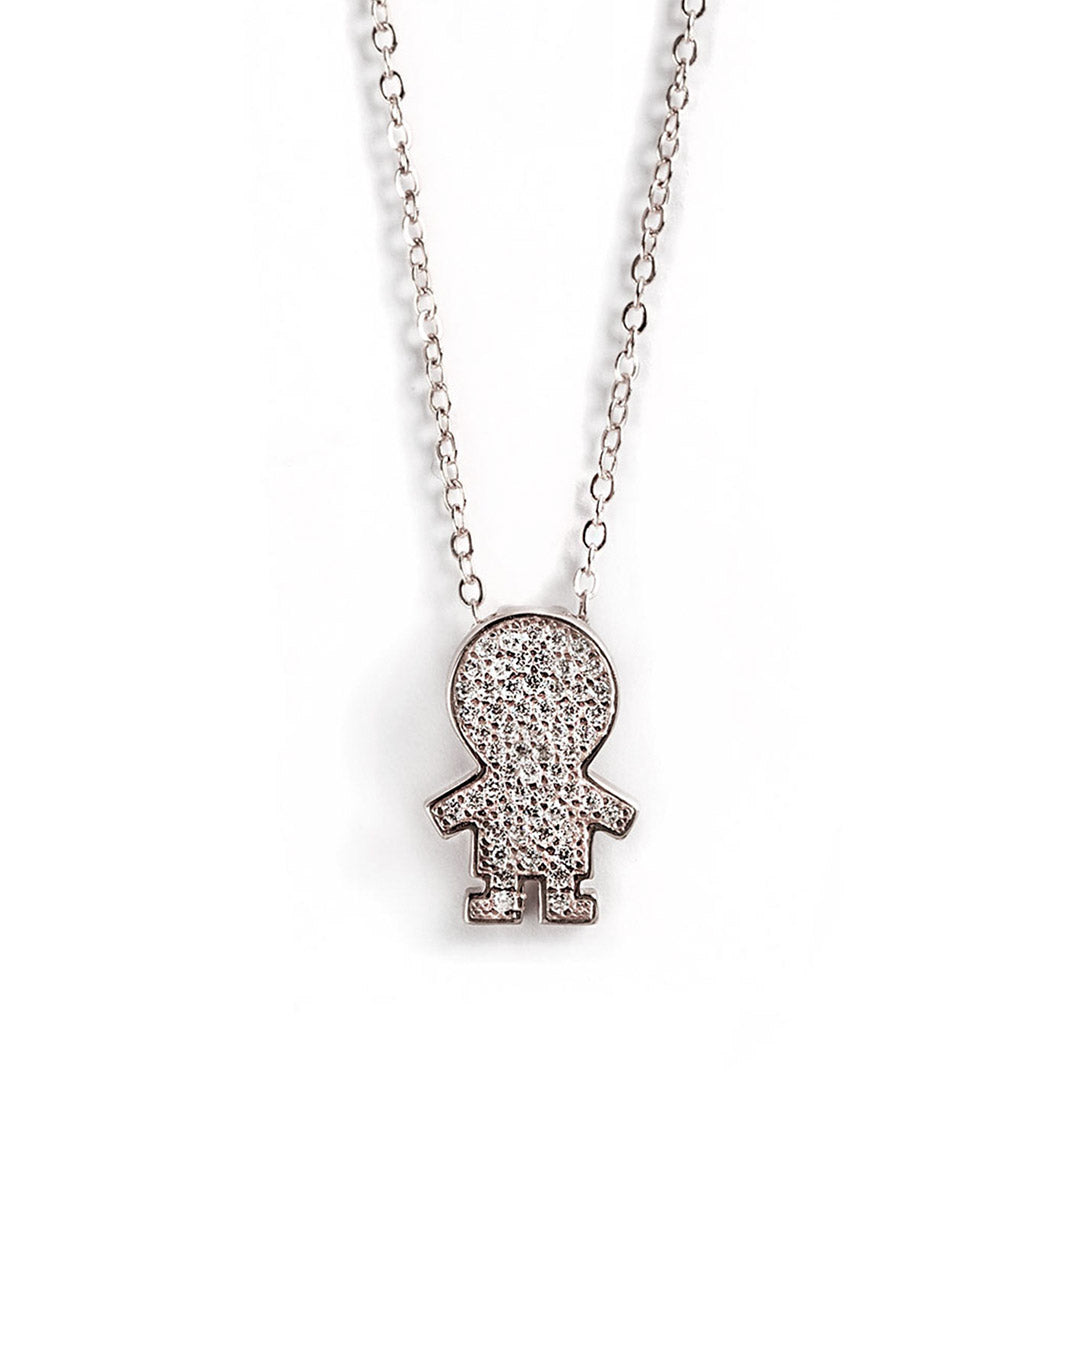 925 SILVER BOY PENDANT WITH CRYSTALS